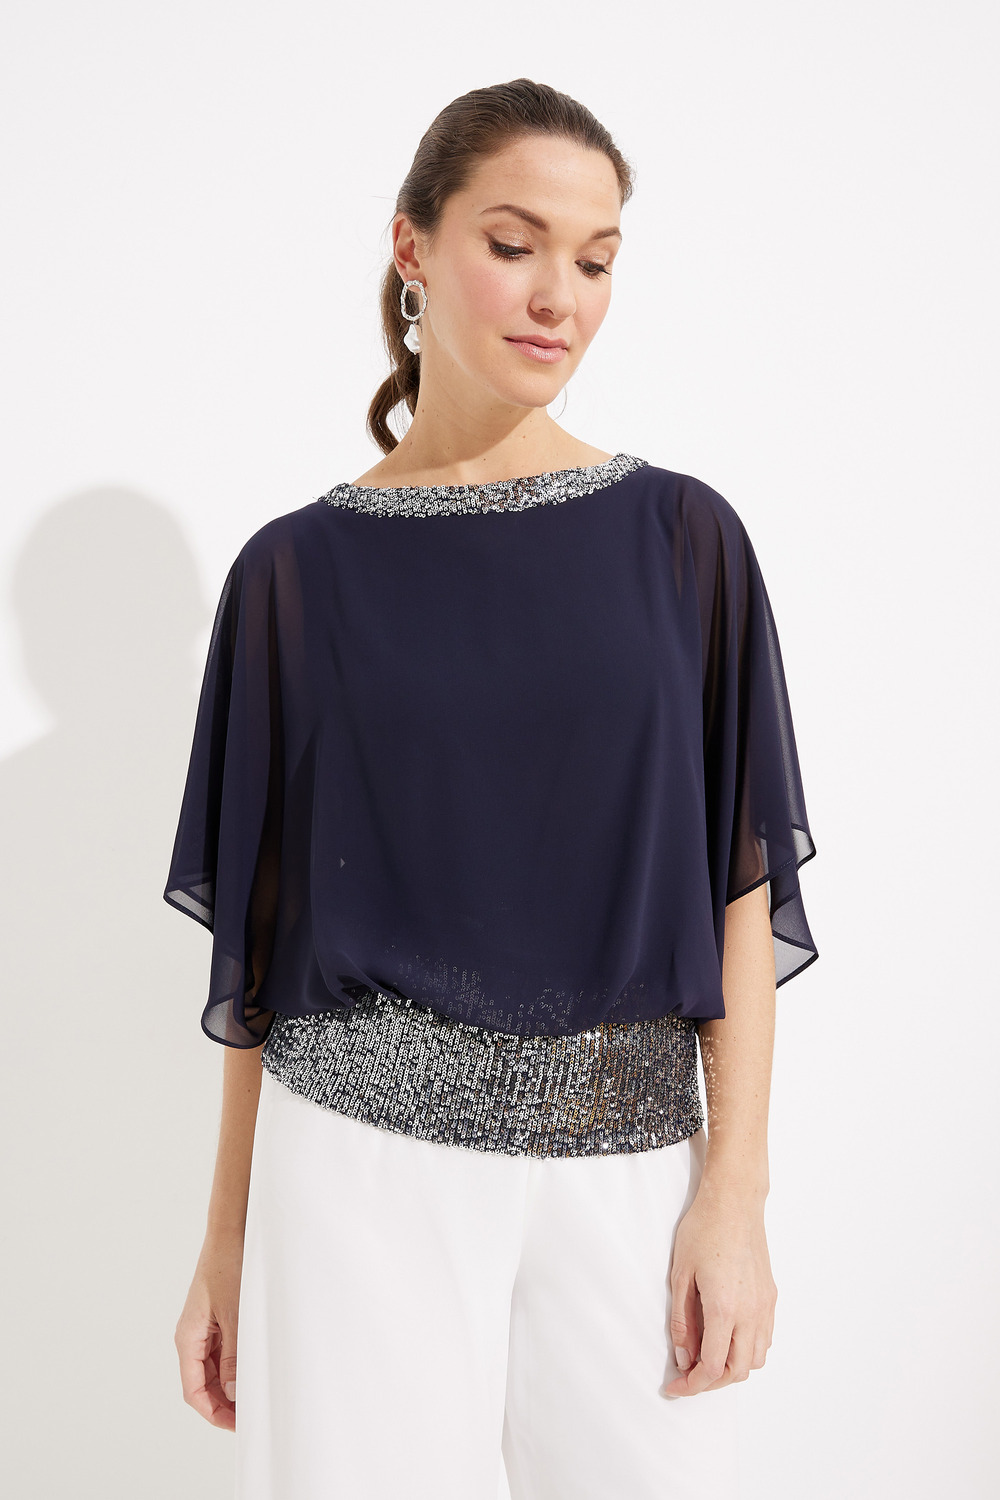 Mixed Media Short Sleeve Top Style 231738. Midnight Blue/silver